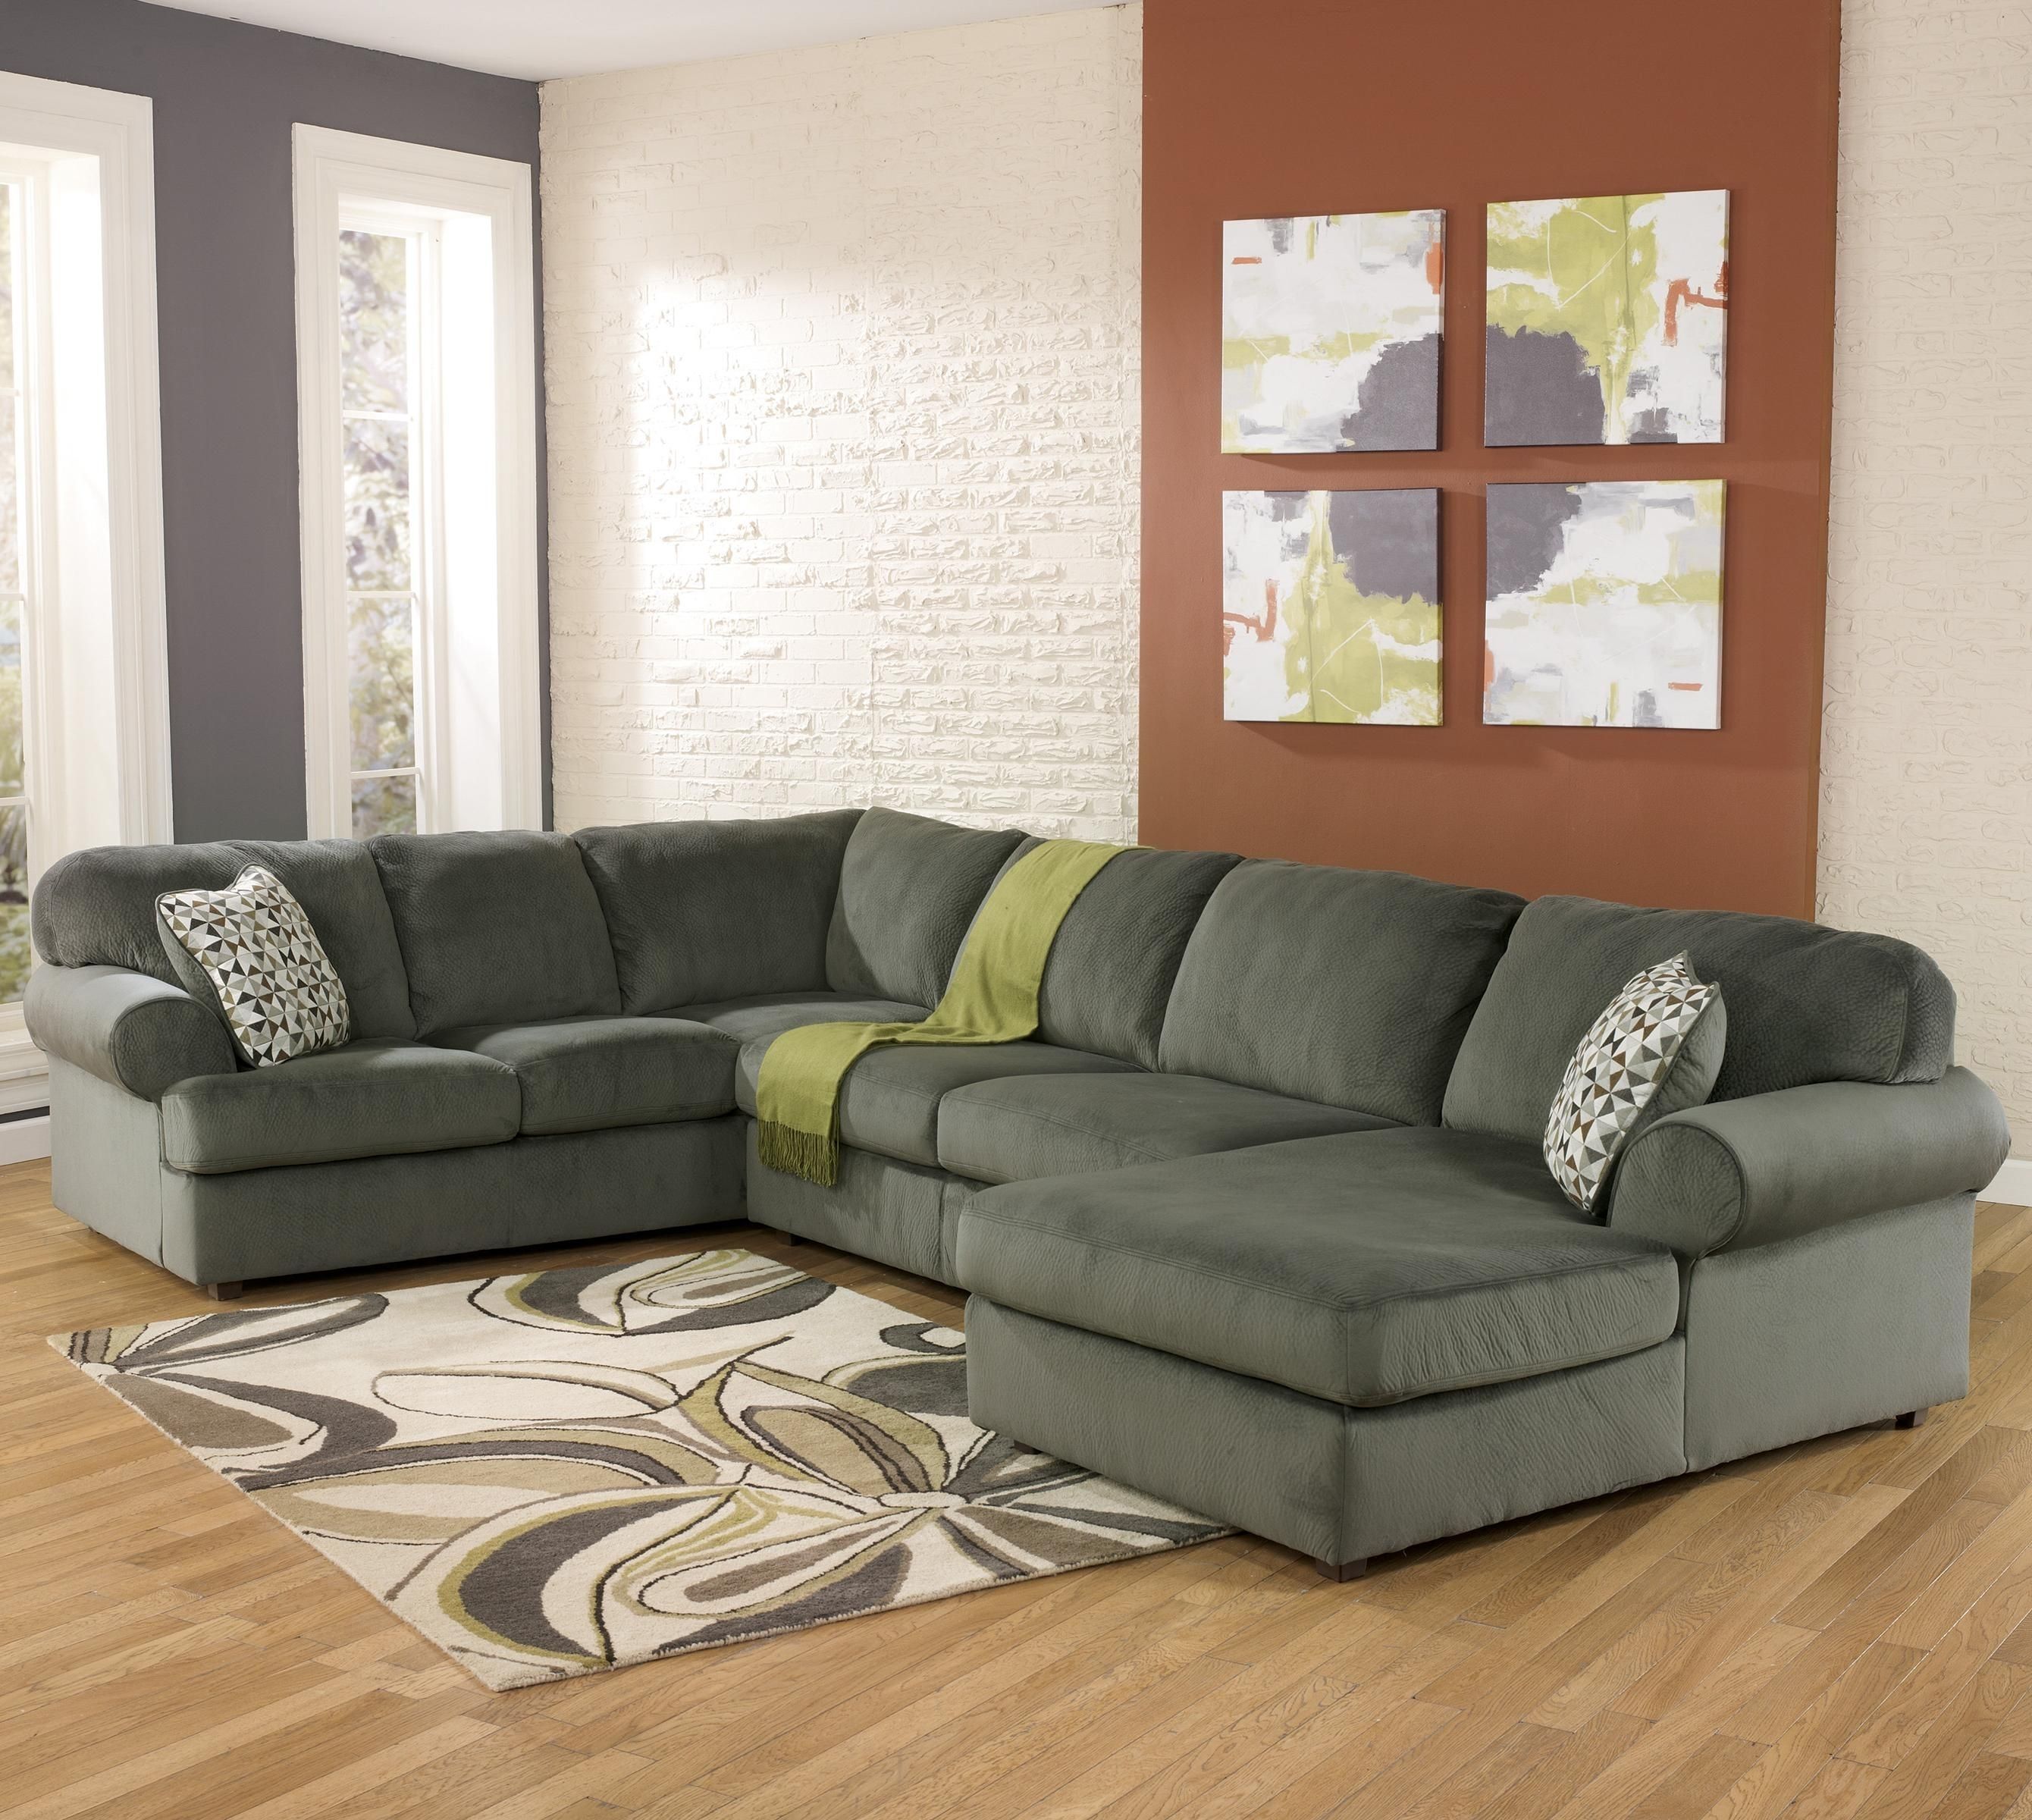 Jessa Place – Pewter Casual Sectional Sofa With Right Chaise In Pensacola Fl Sectional Sofas (Photo 8 of 10)